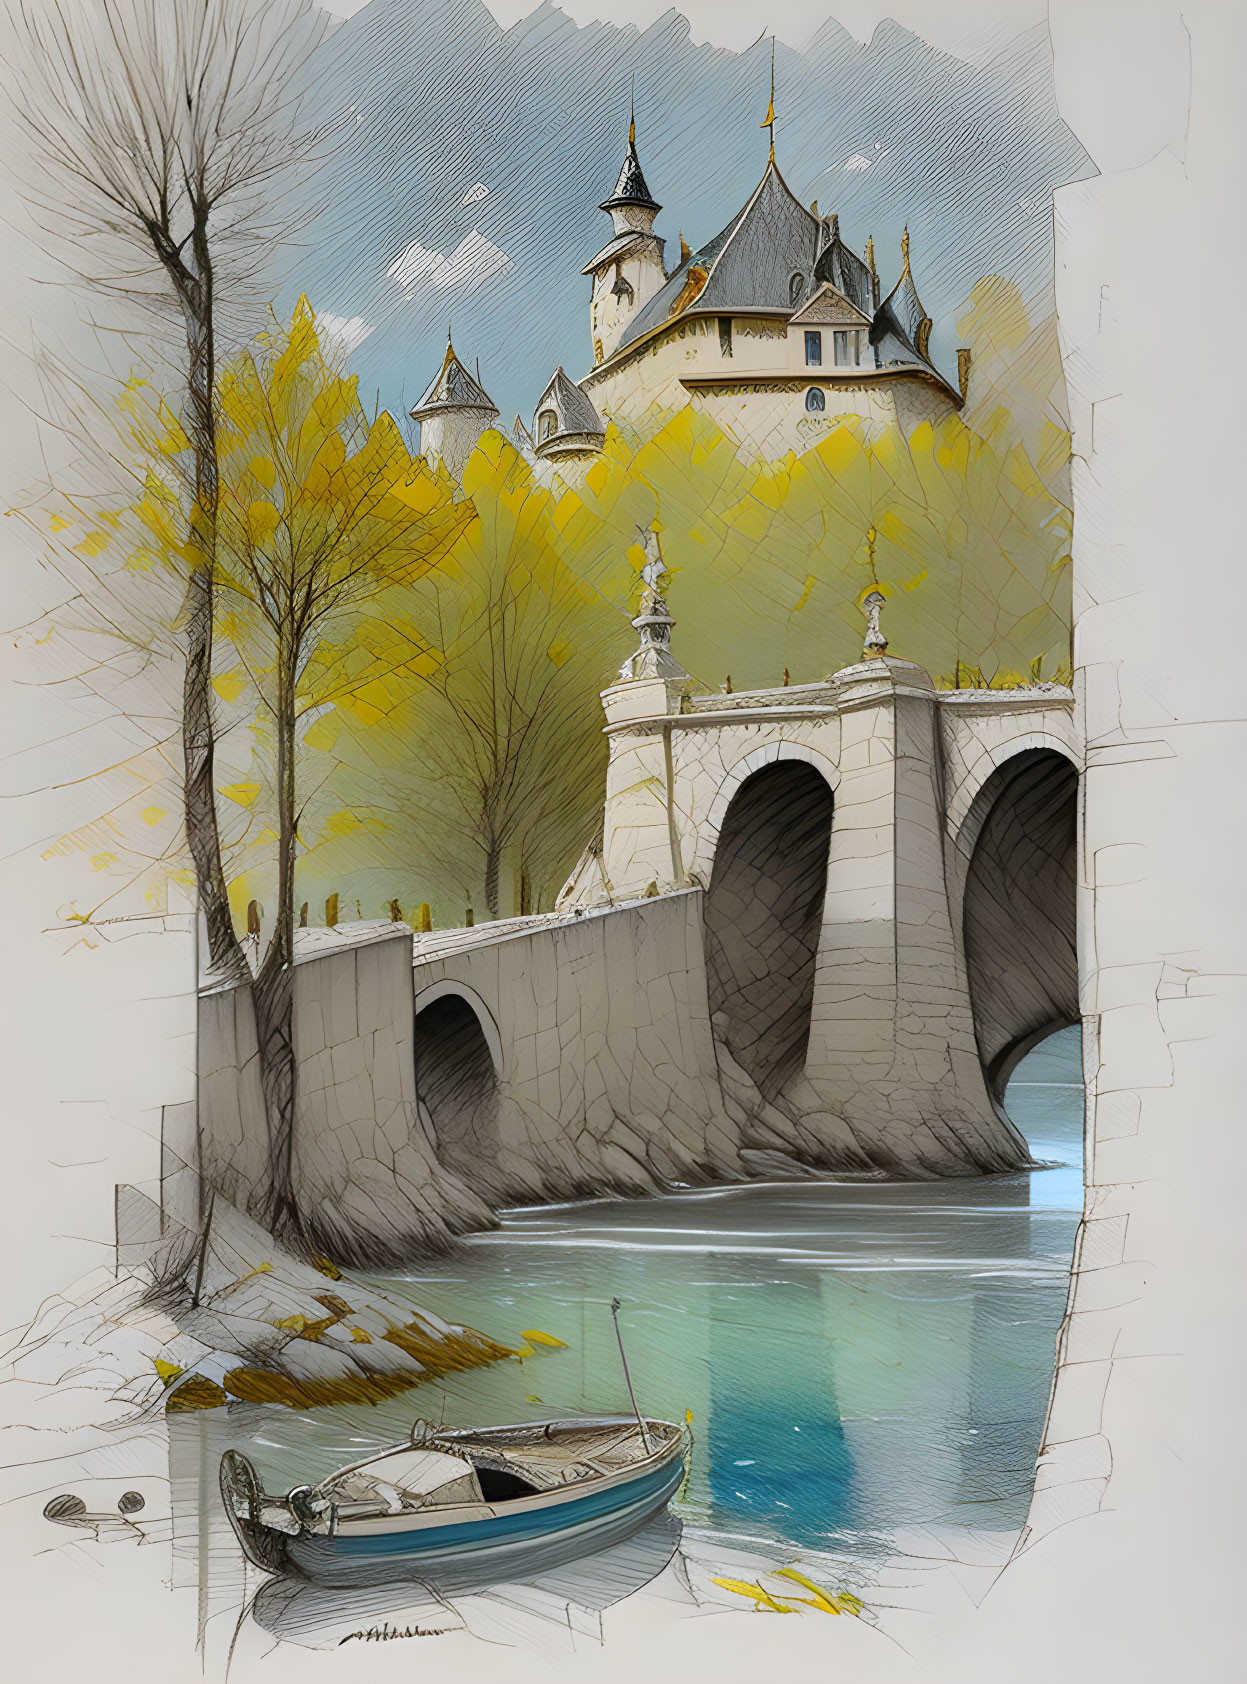 Castle on hill with stone bridge, autumn trees, boat by shore in sketched style